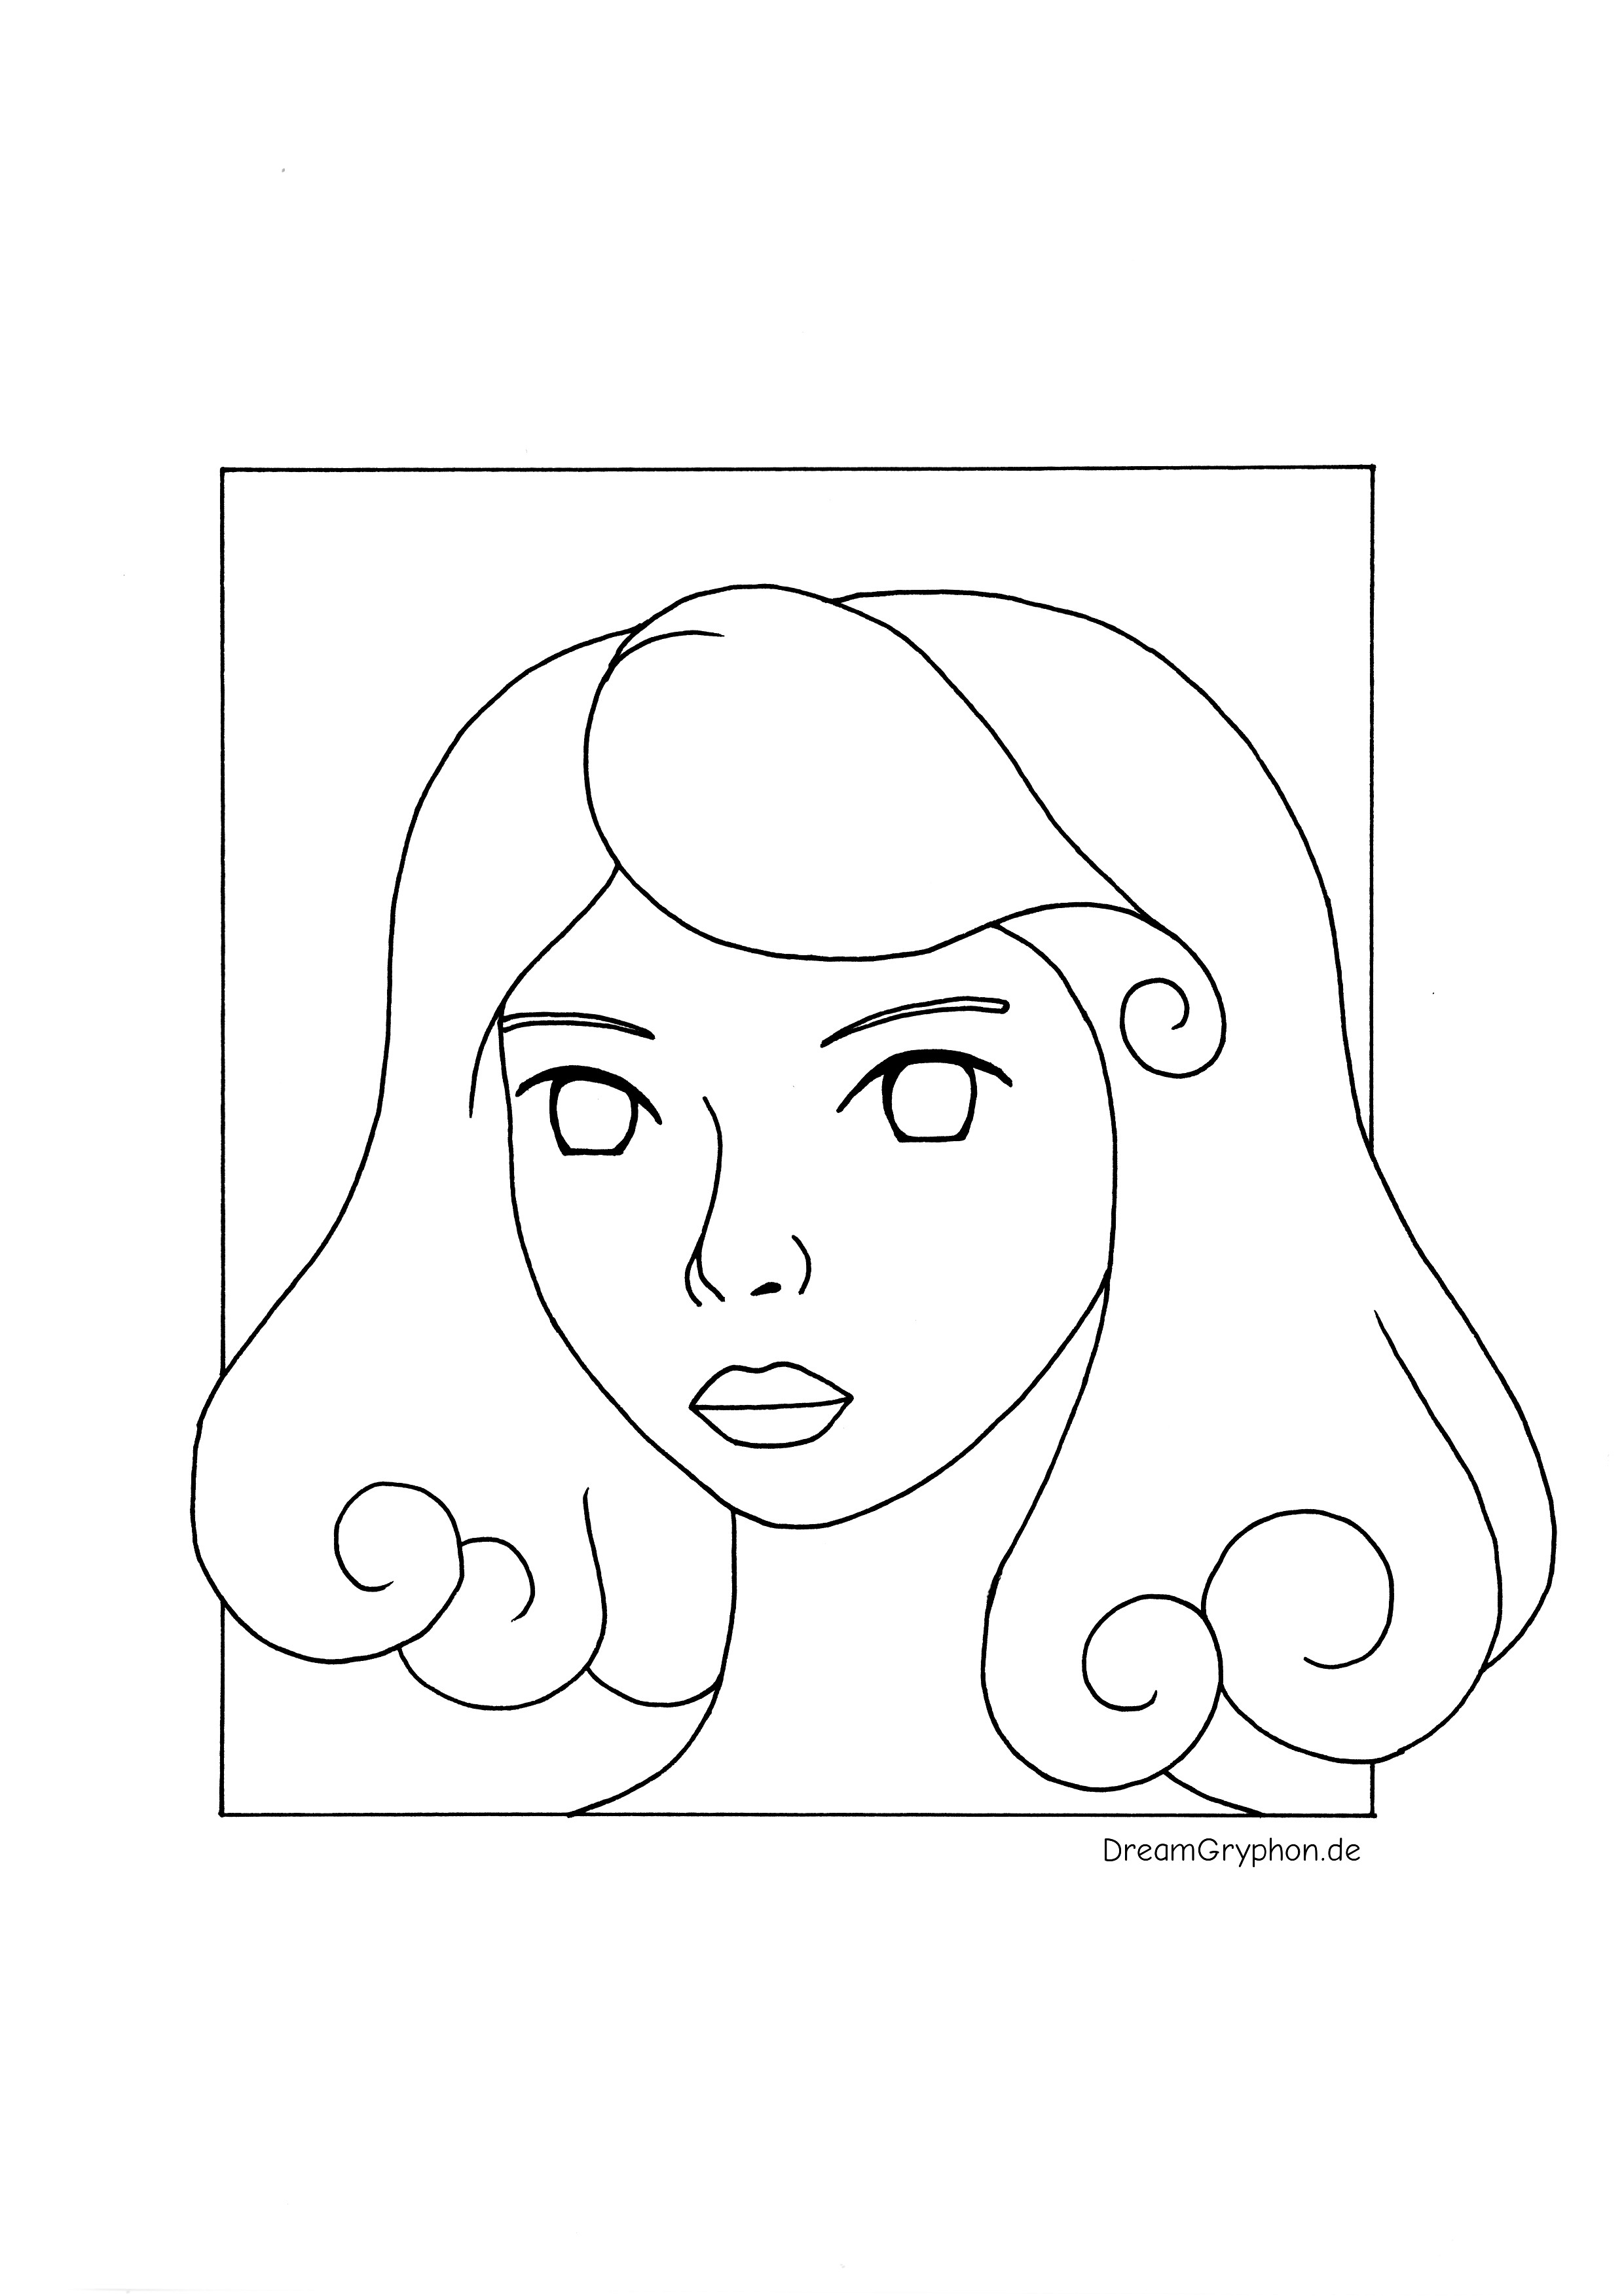 Coloring Page: Head in comic-book style